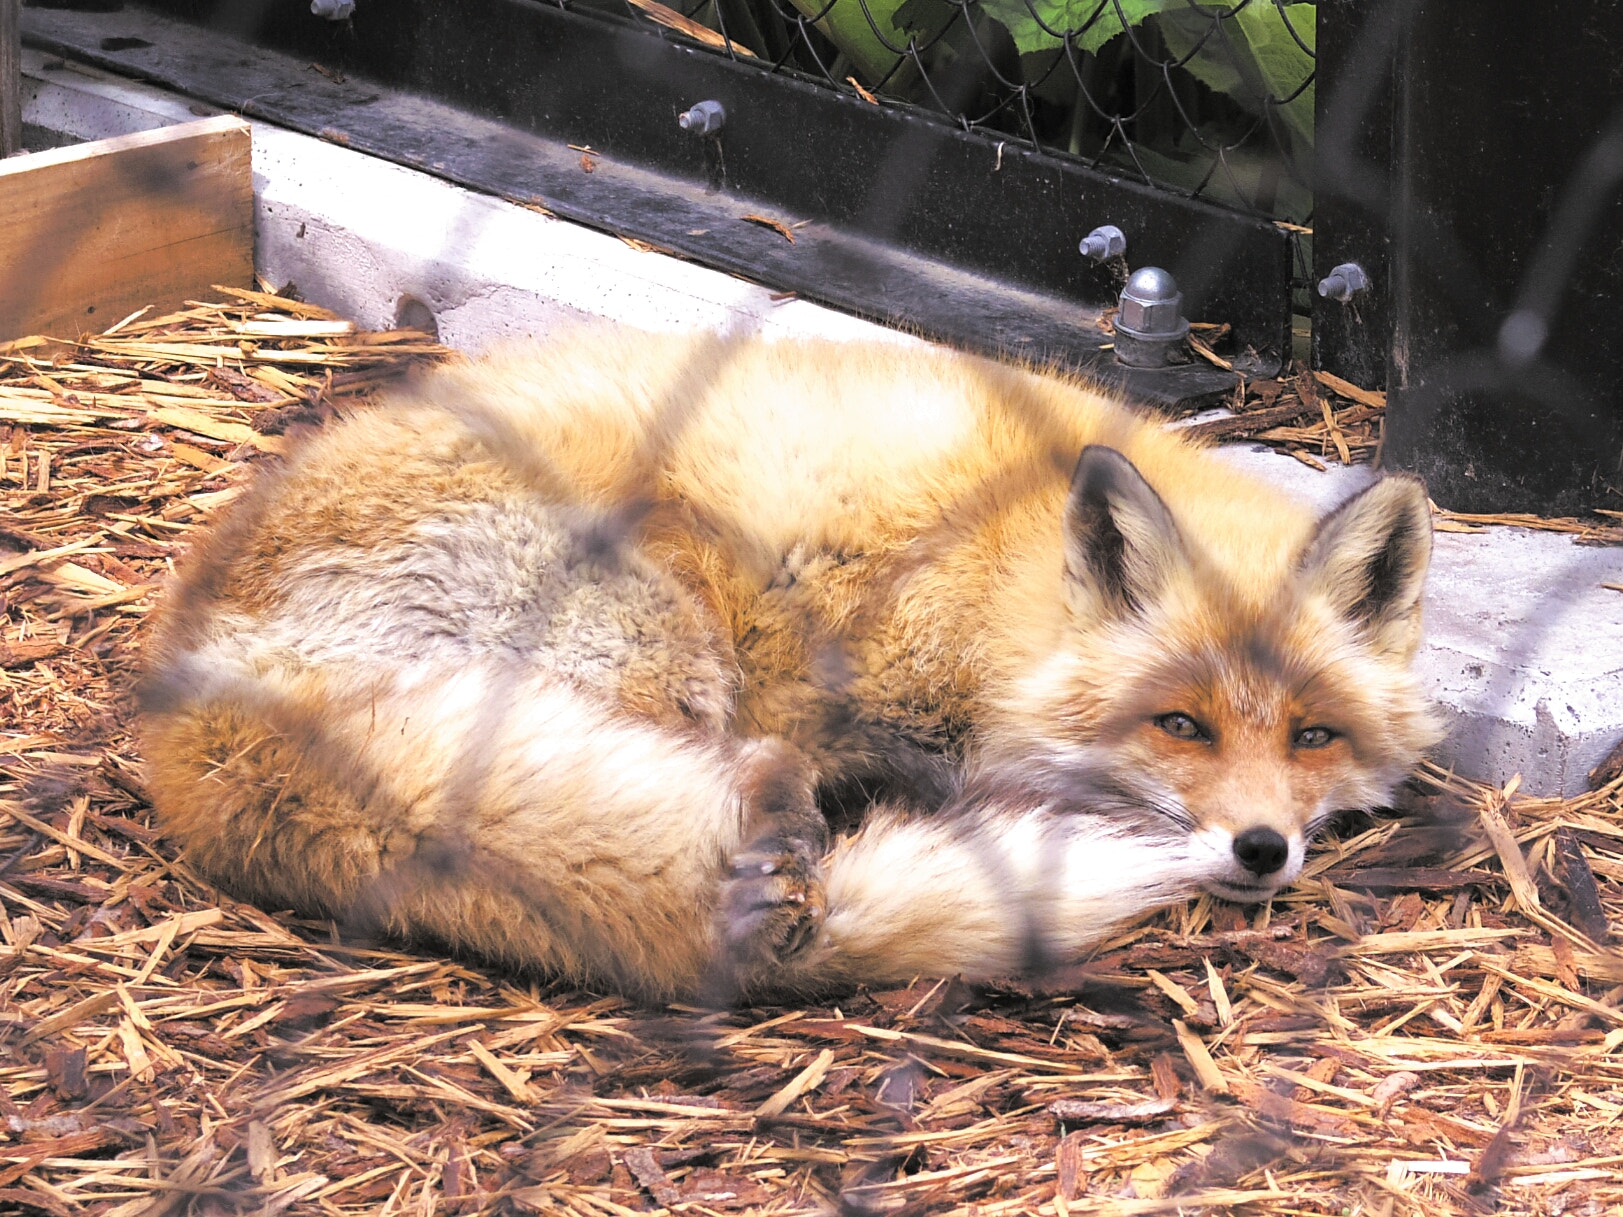 Pentax Q7 sample photo. A fox in a cage photography